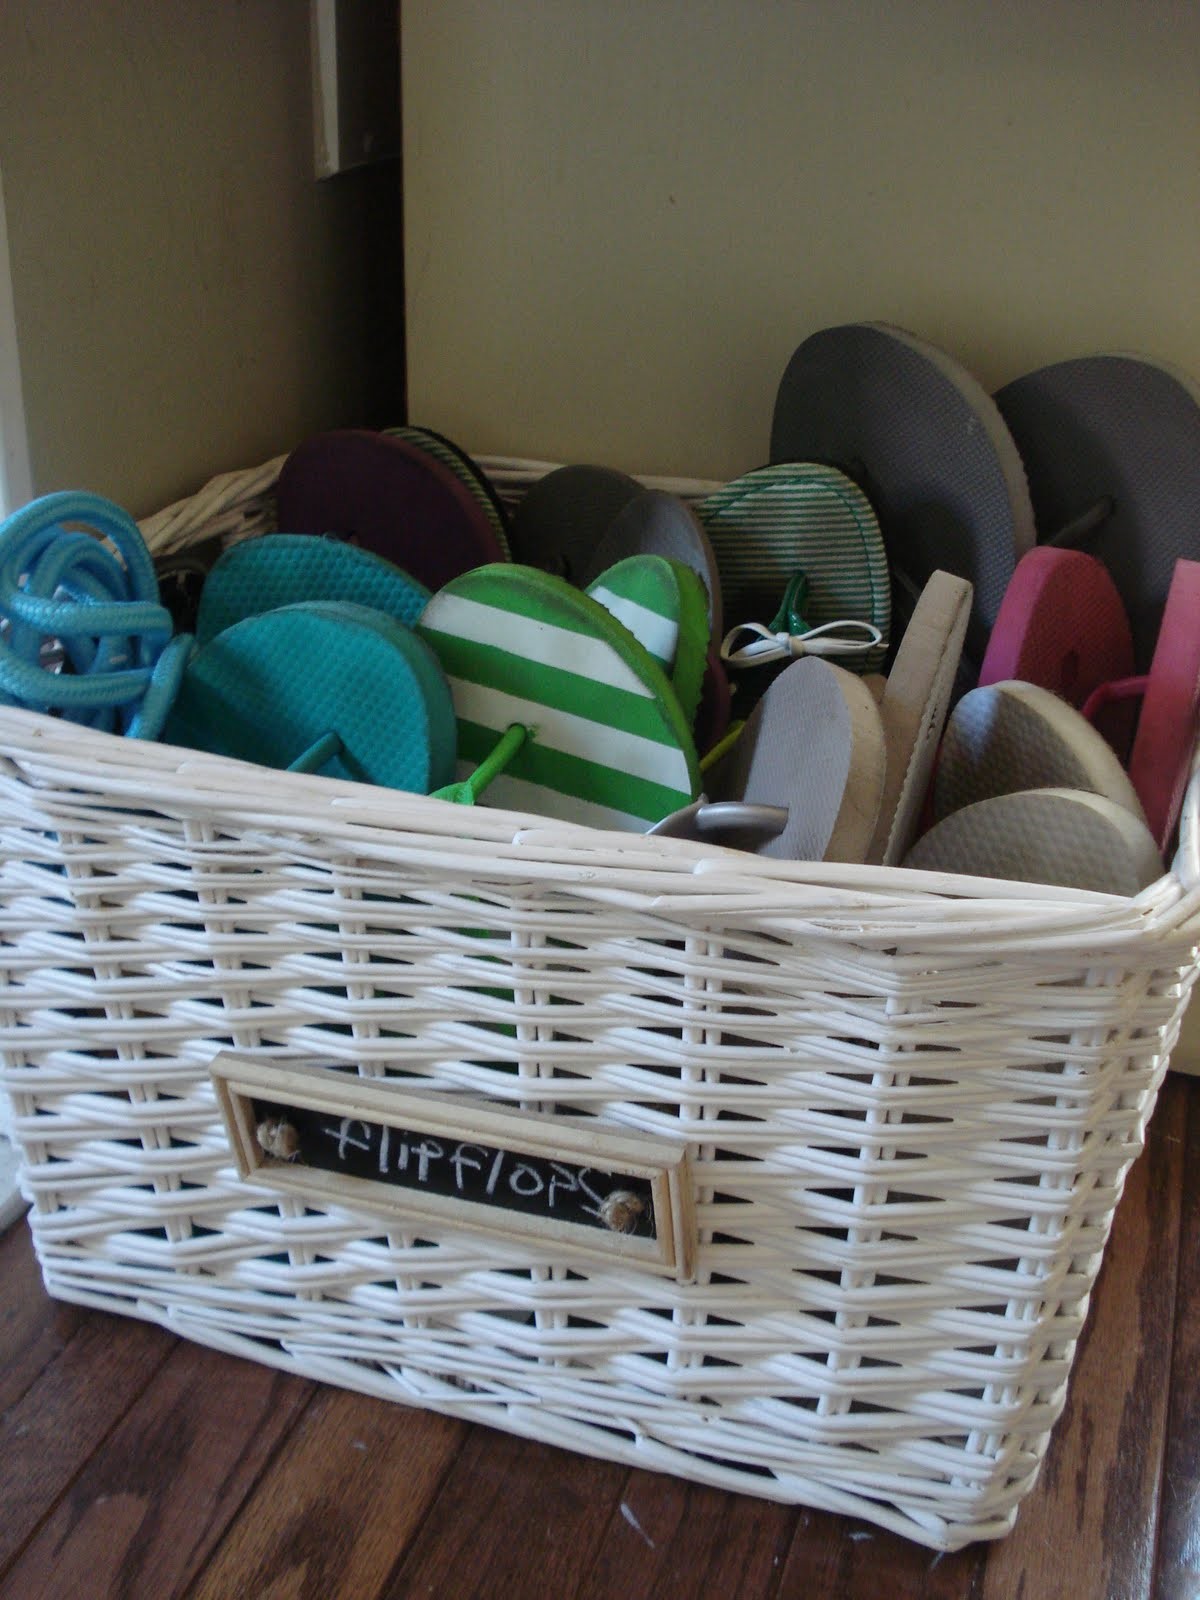 10 Organize Your Footwear with Wicker Baskets via Simphome 1